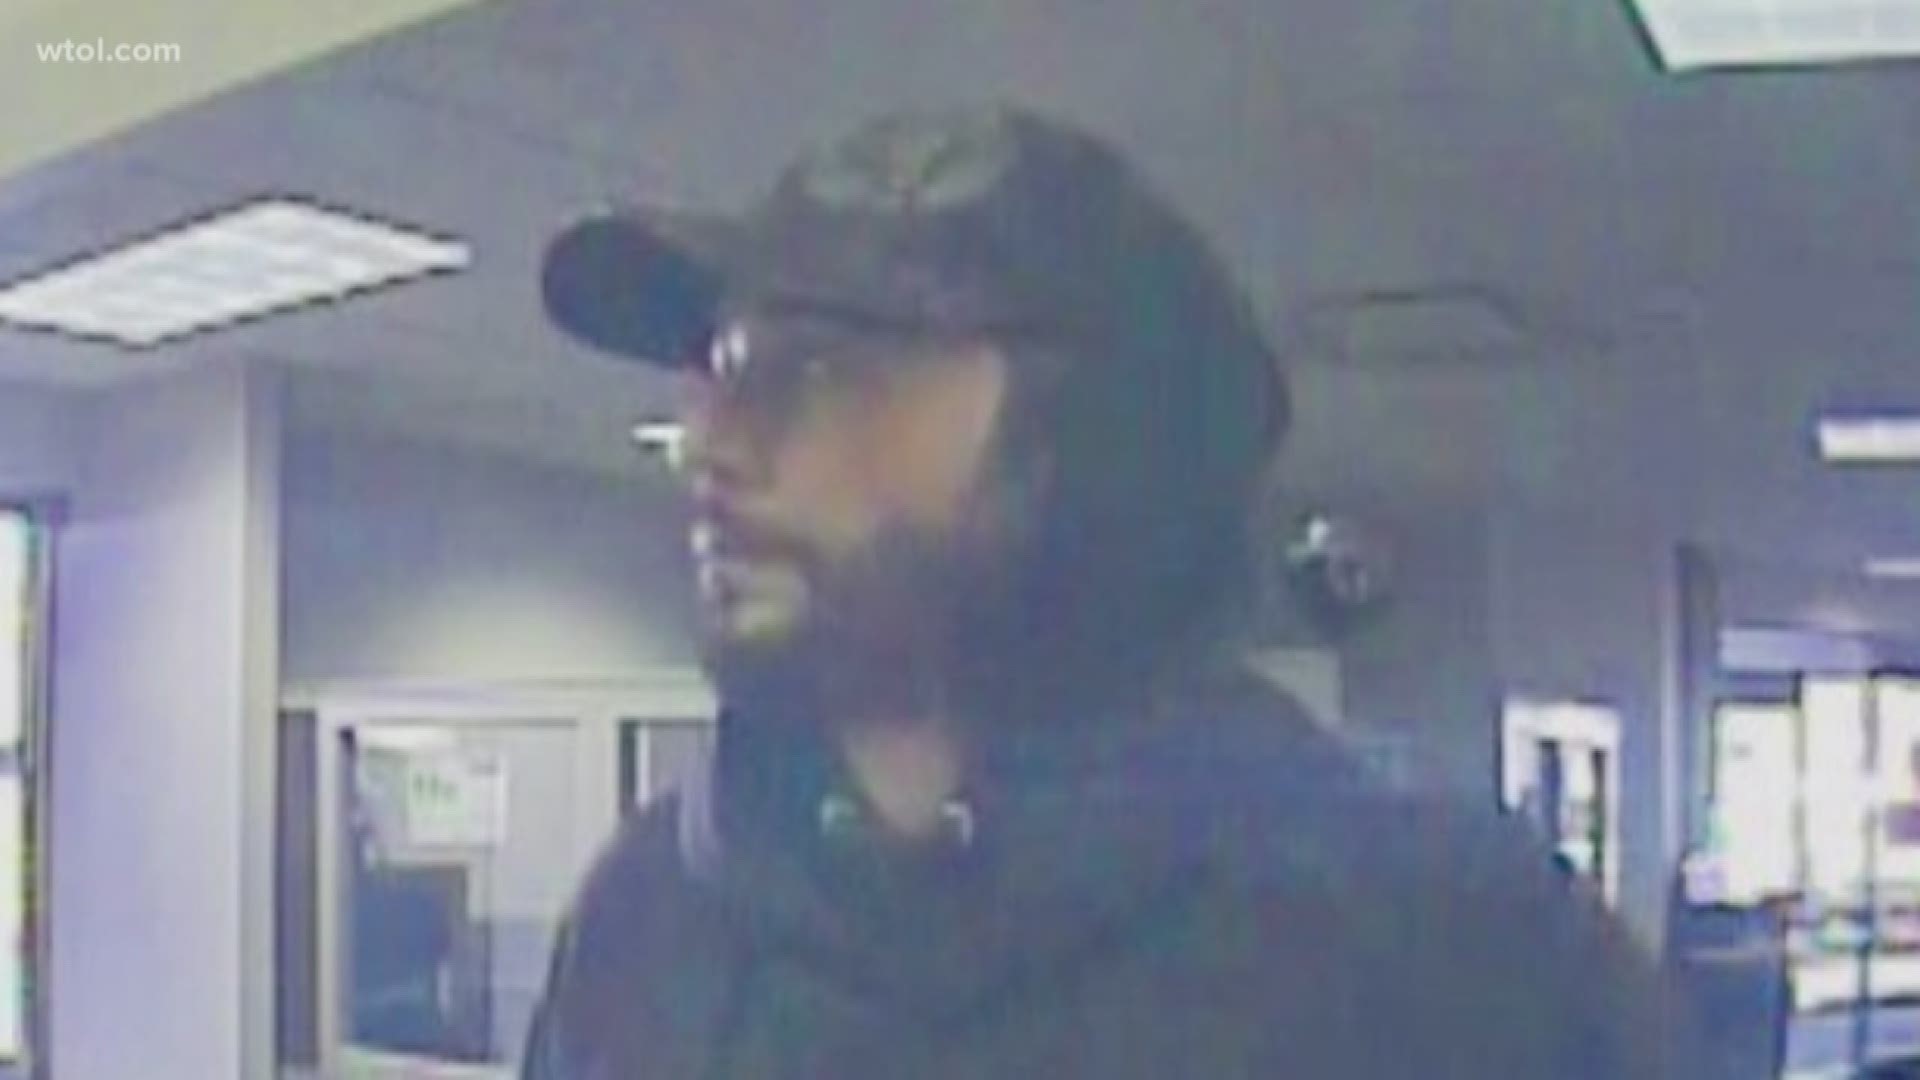 Police say the man entered Key Bank in west Toledo, demanded cash, indicated he was armed and fled after getting money.